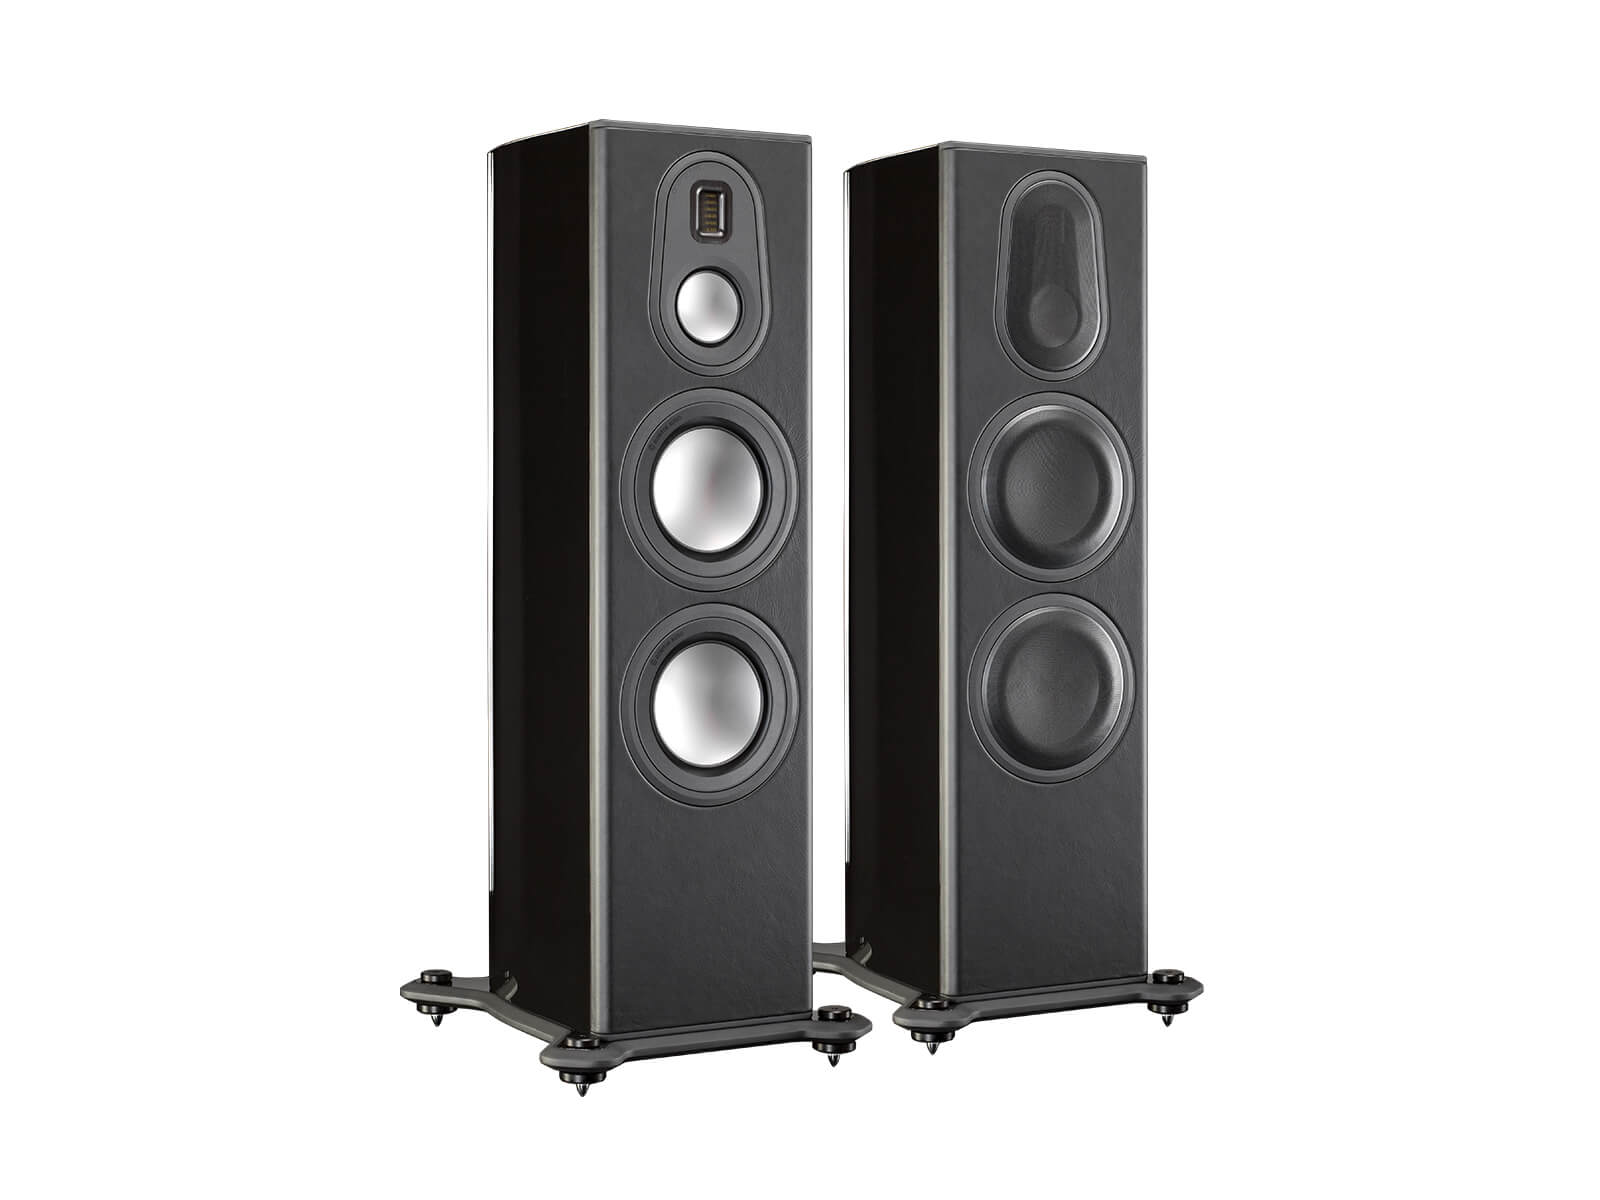 Platinum PL300 II, floorstanding speakers, featuring a grille and a piano black lacquer finish.